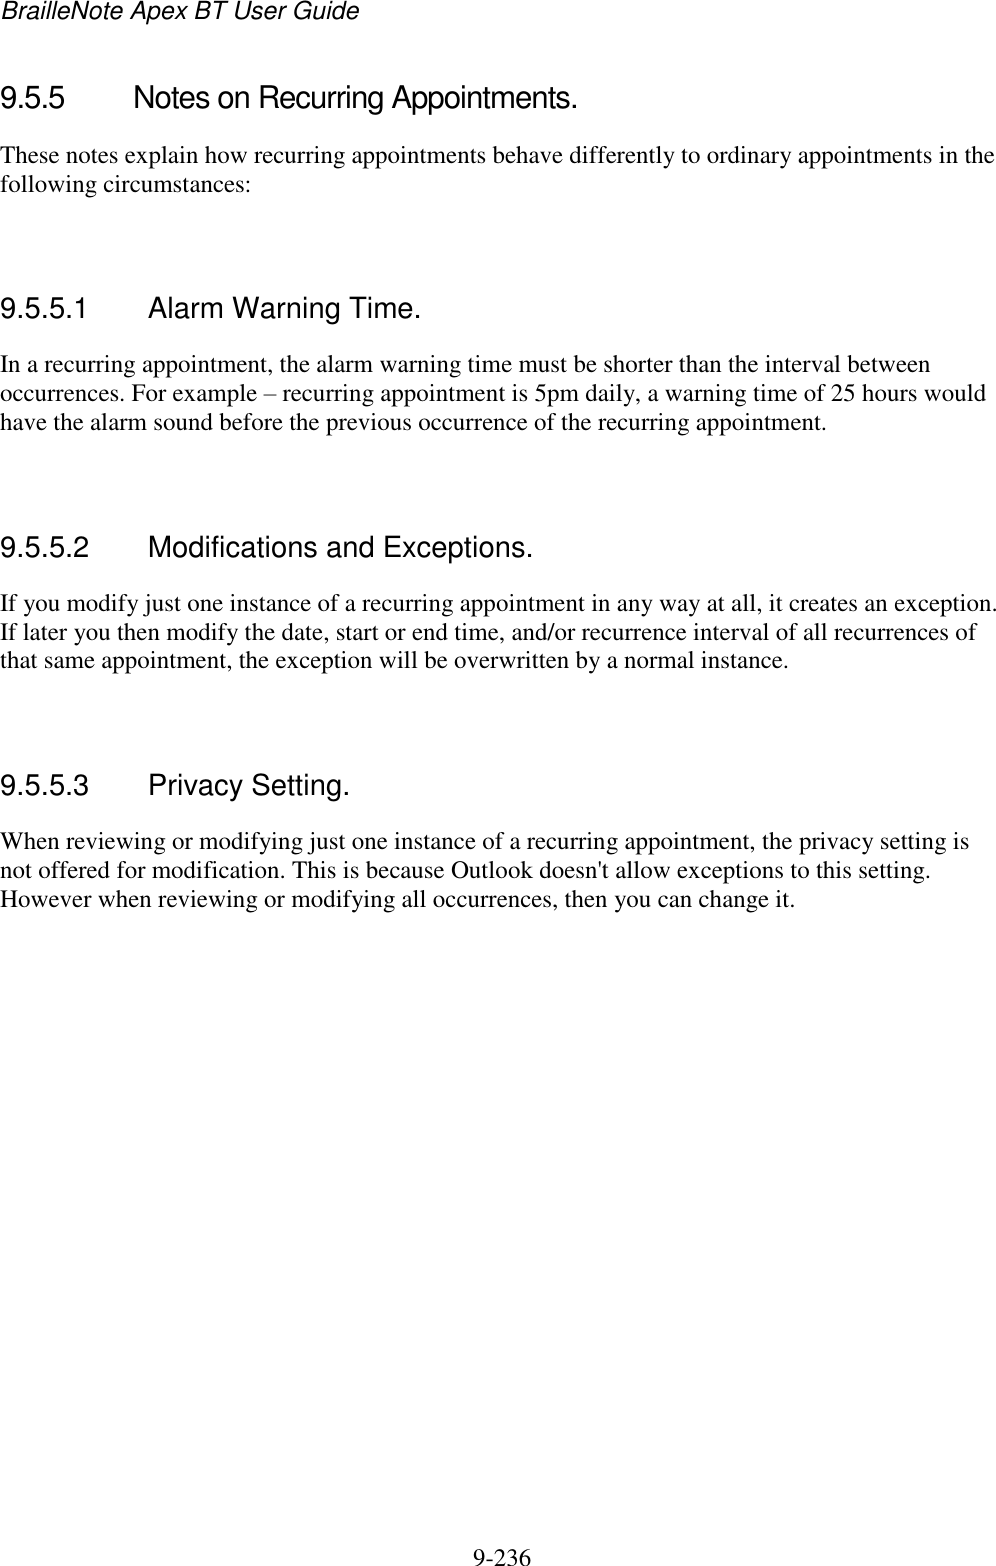 BrailleNote Apex BT User Guide   9-236   9.5.5  Notes on Recurring Appointments. These notes explain how recurring appointments behave differently to ordinary appointments in the following circumstances:   9.5.5.1  Alarm Warning Time. In a recurring appointment, the alarm warning time must be shorter than the interval between occurrences. For example – recurring appointment is 5pm daily, a warning time of 25 hours would have the alarm sound before the previous occurrence of the recurring appointment.   9.5.5.2  Modifications and Exceptions. If you modify just one instance of a recurring appointment in any way at all, it creates an exception. If later you then modify the date, start or end time, and/or recurrence interval of all recurrences of that same appointment, the exception will be overwritten by a normal instance.   9.5.5.3  Privacy Setting. When reviewing or modifying just one instance of a recurring appointment, the privacy setting is not offered for modification. This is because Outlook doesn&apos;t allow exceptions to this setting. However when reviewing or modifying all occurrences, then you can change it.   